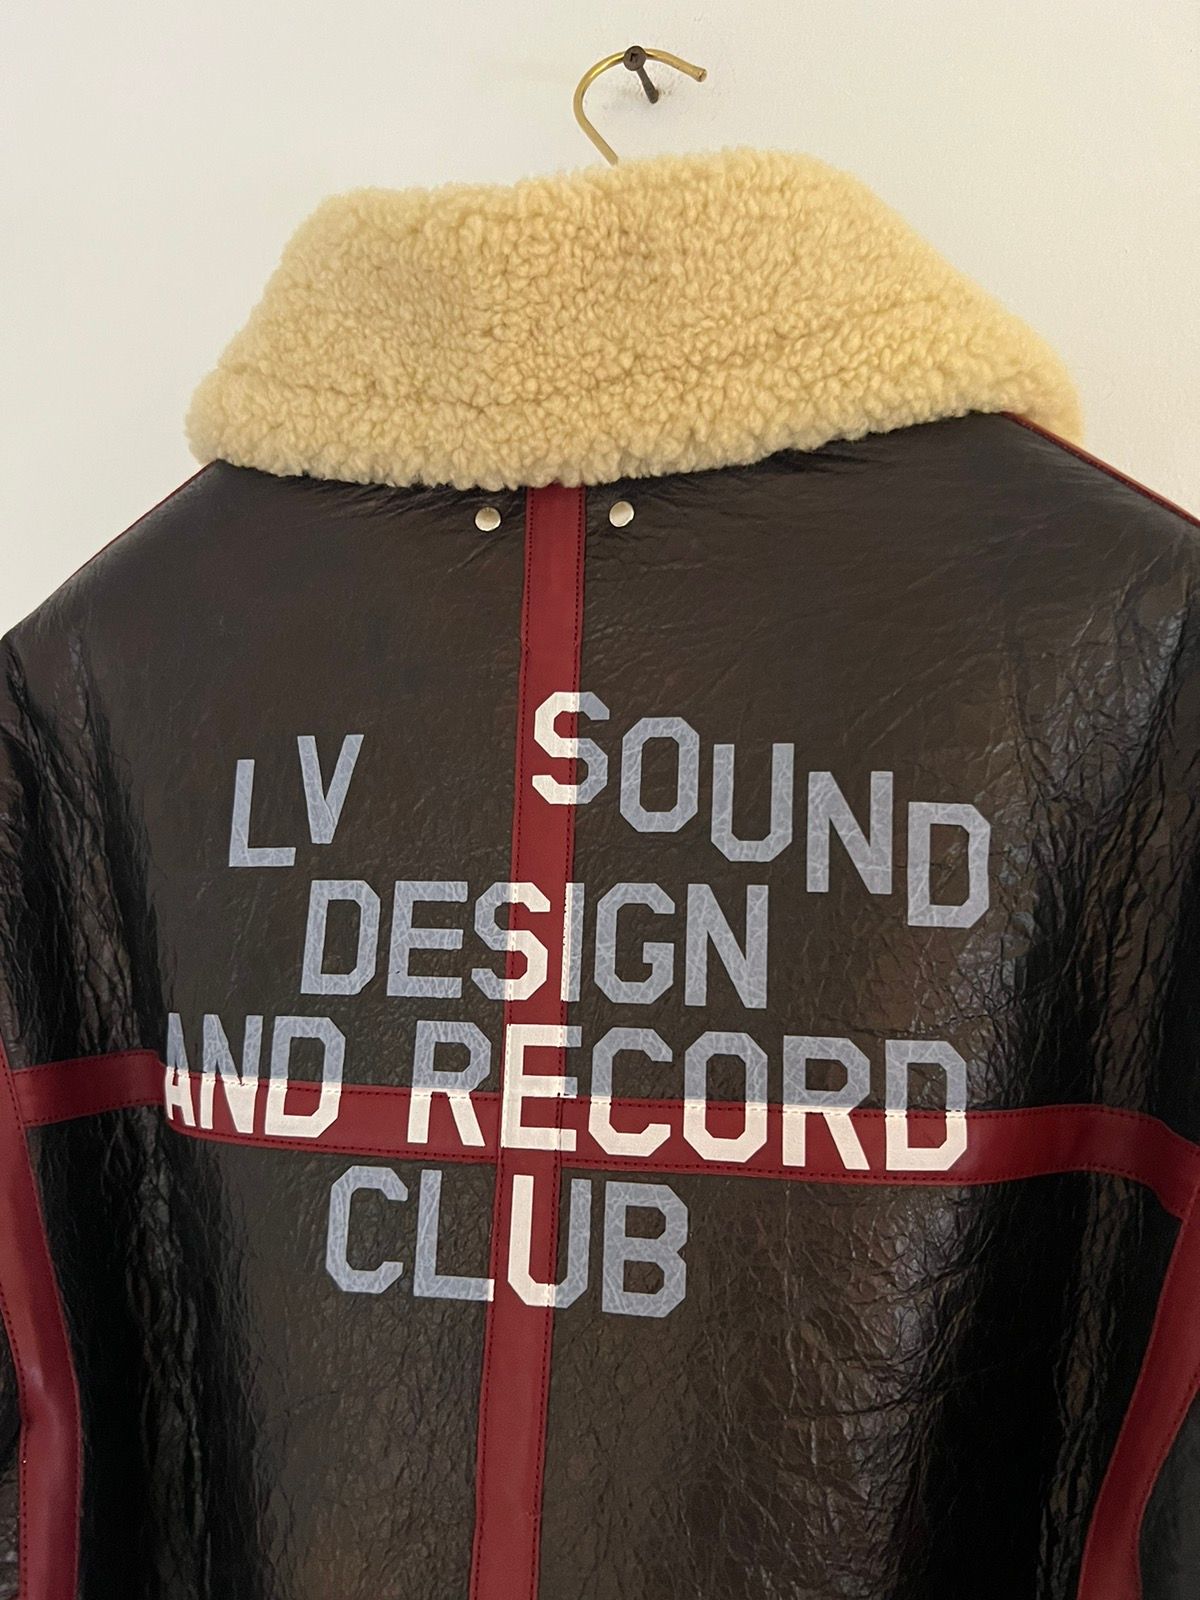 Louis Vuitton $11,800 LV Sound Design & Record Club Shearing Leather Coat